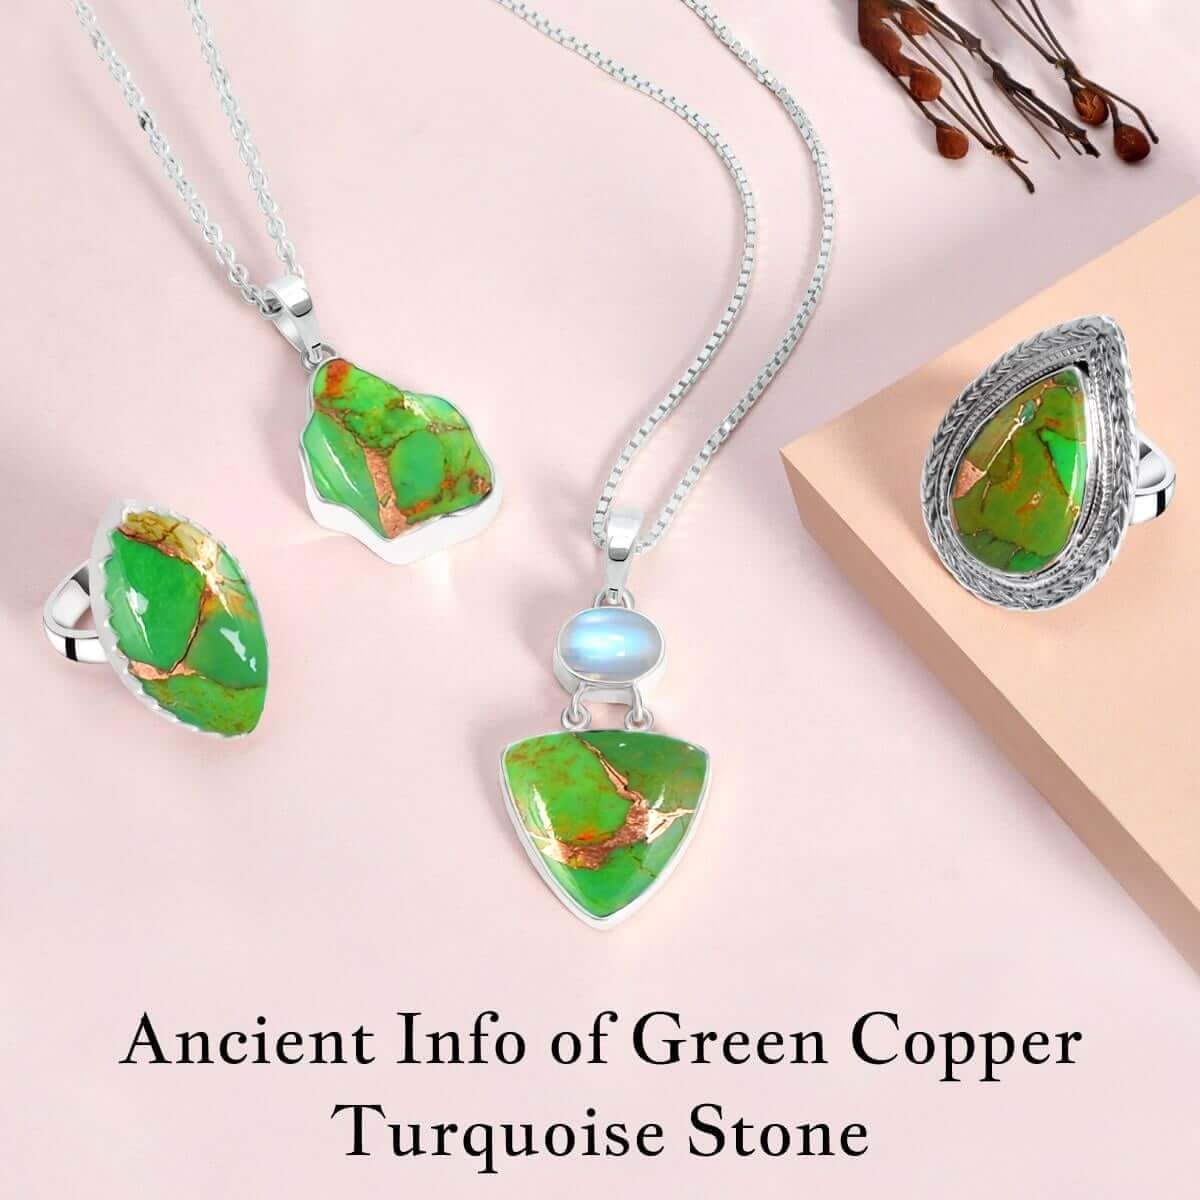 Green Copper Turquoise Gemstone History